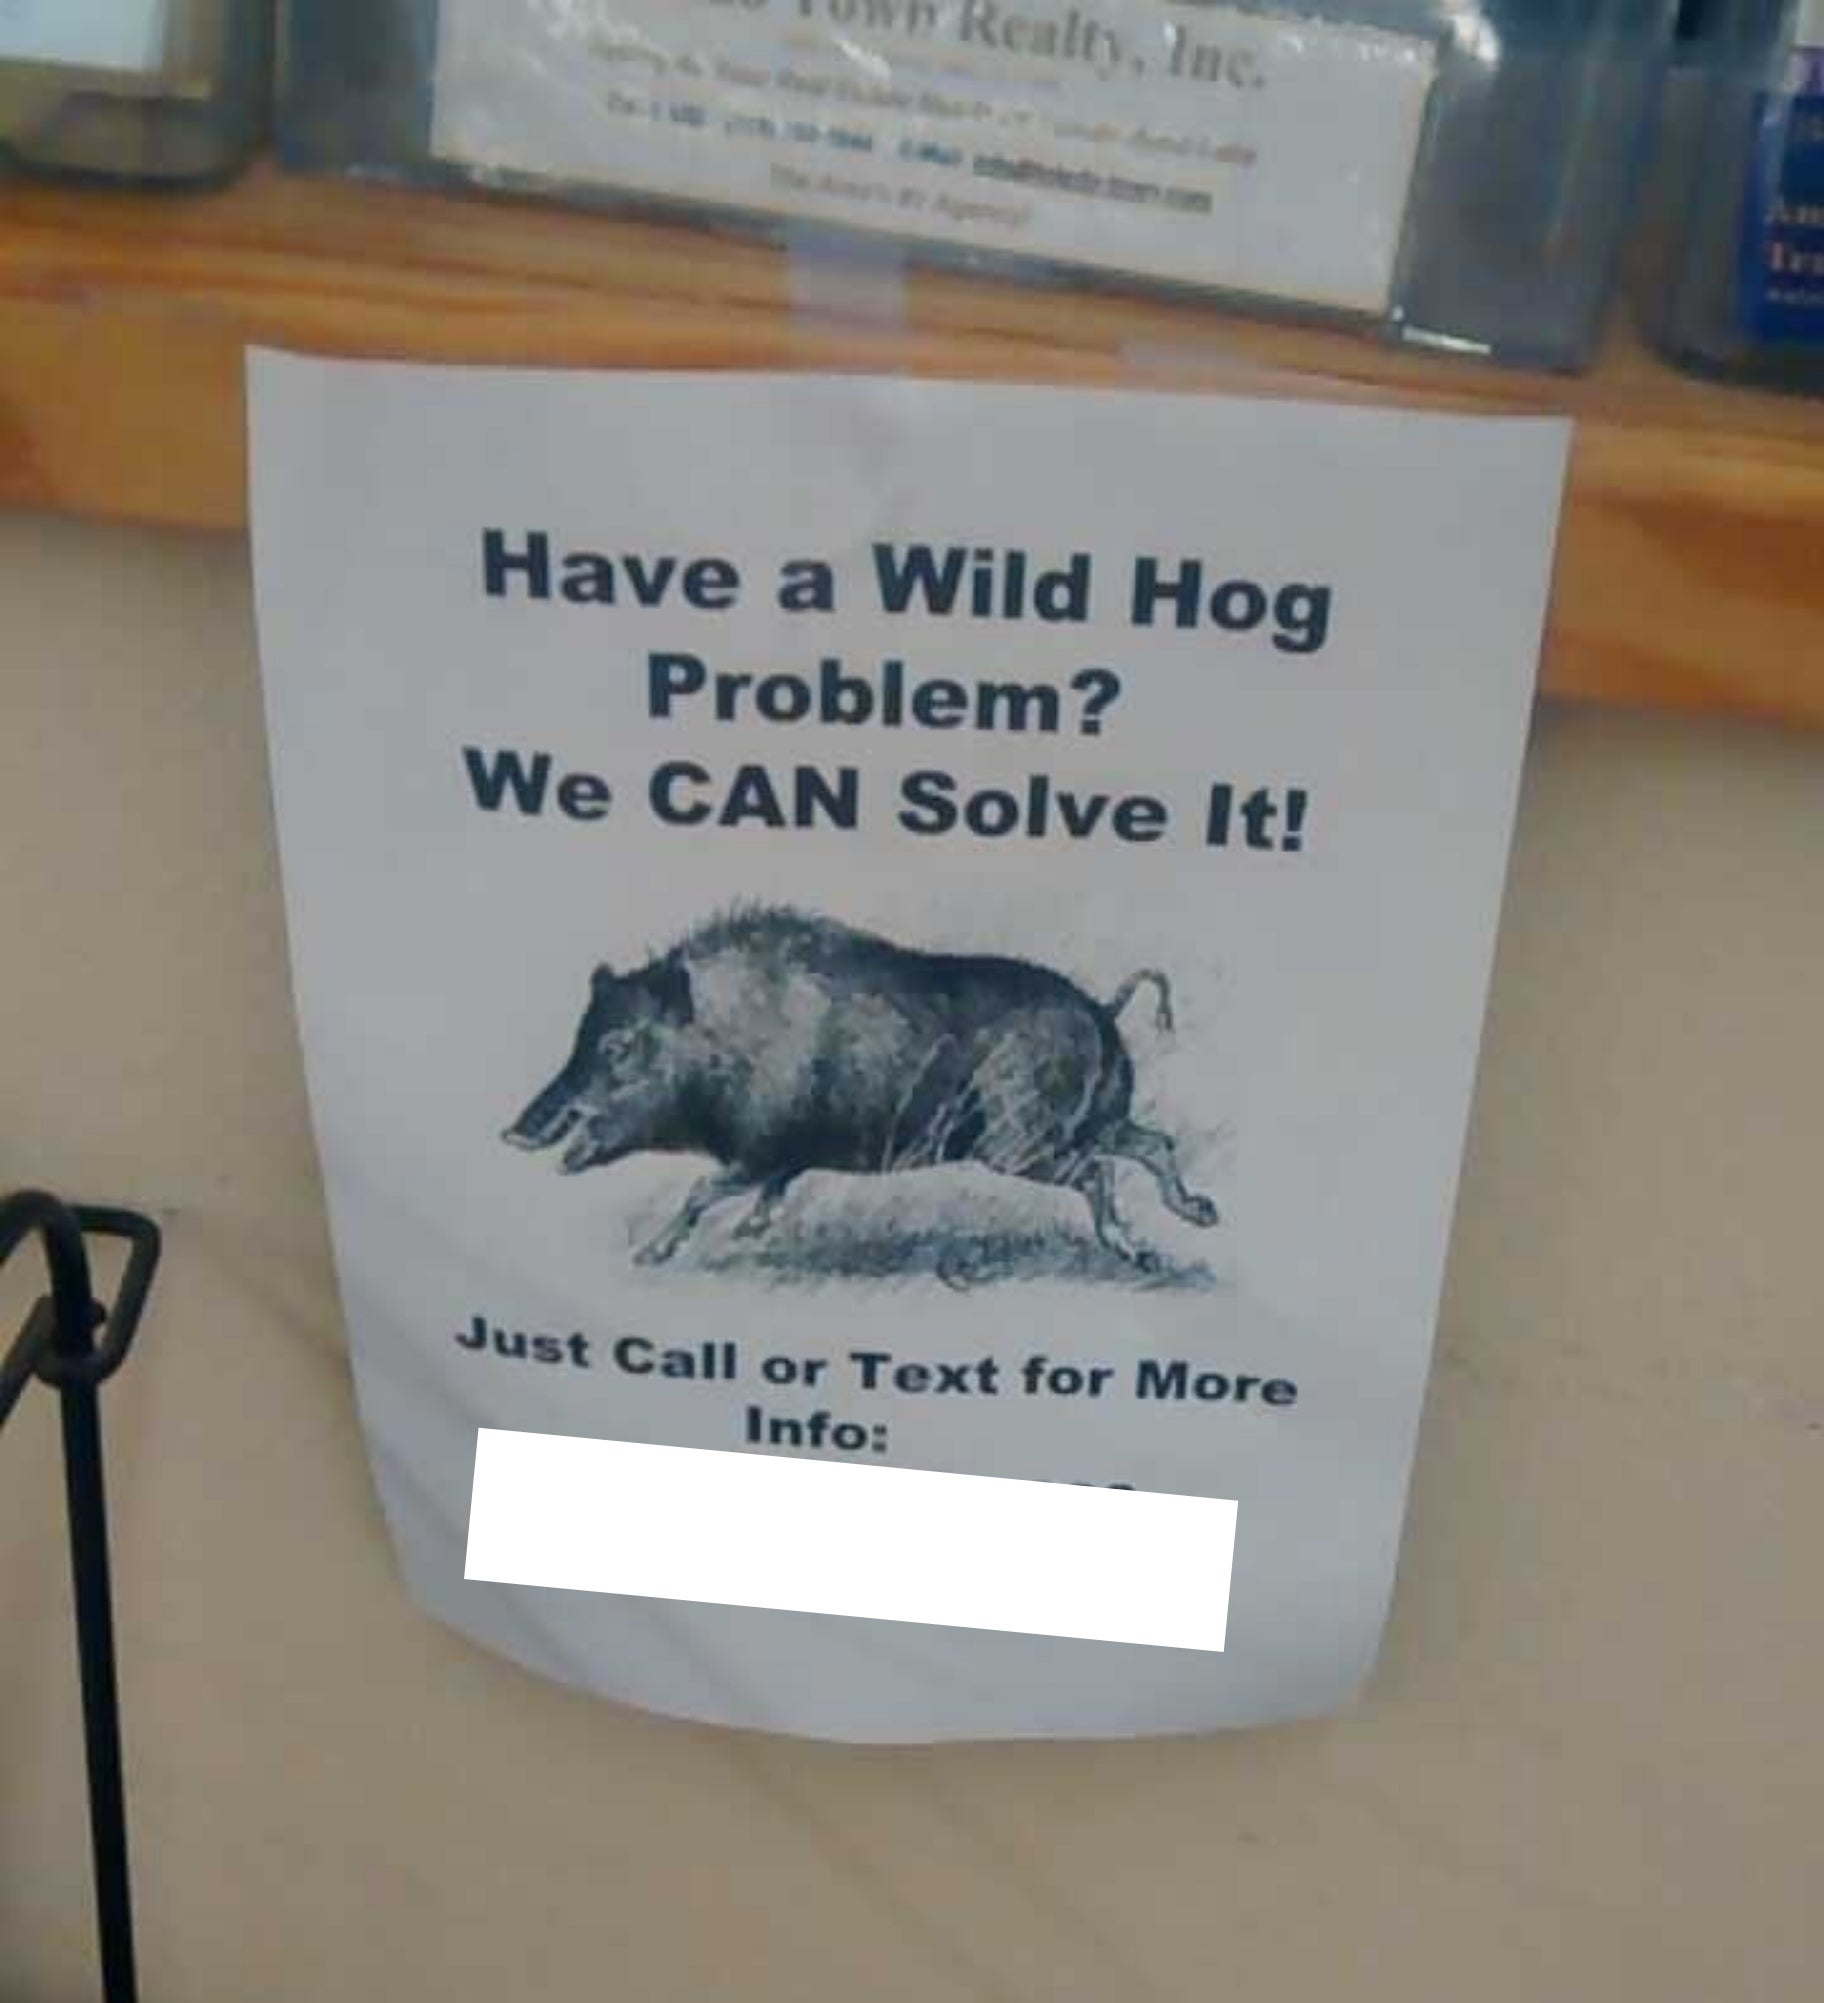 Flyer offering wild hog problem solutions with contact number